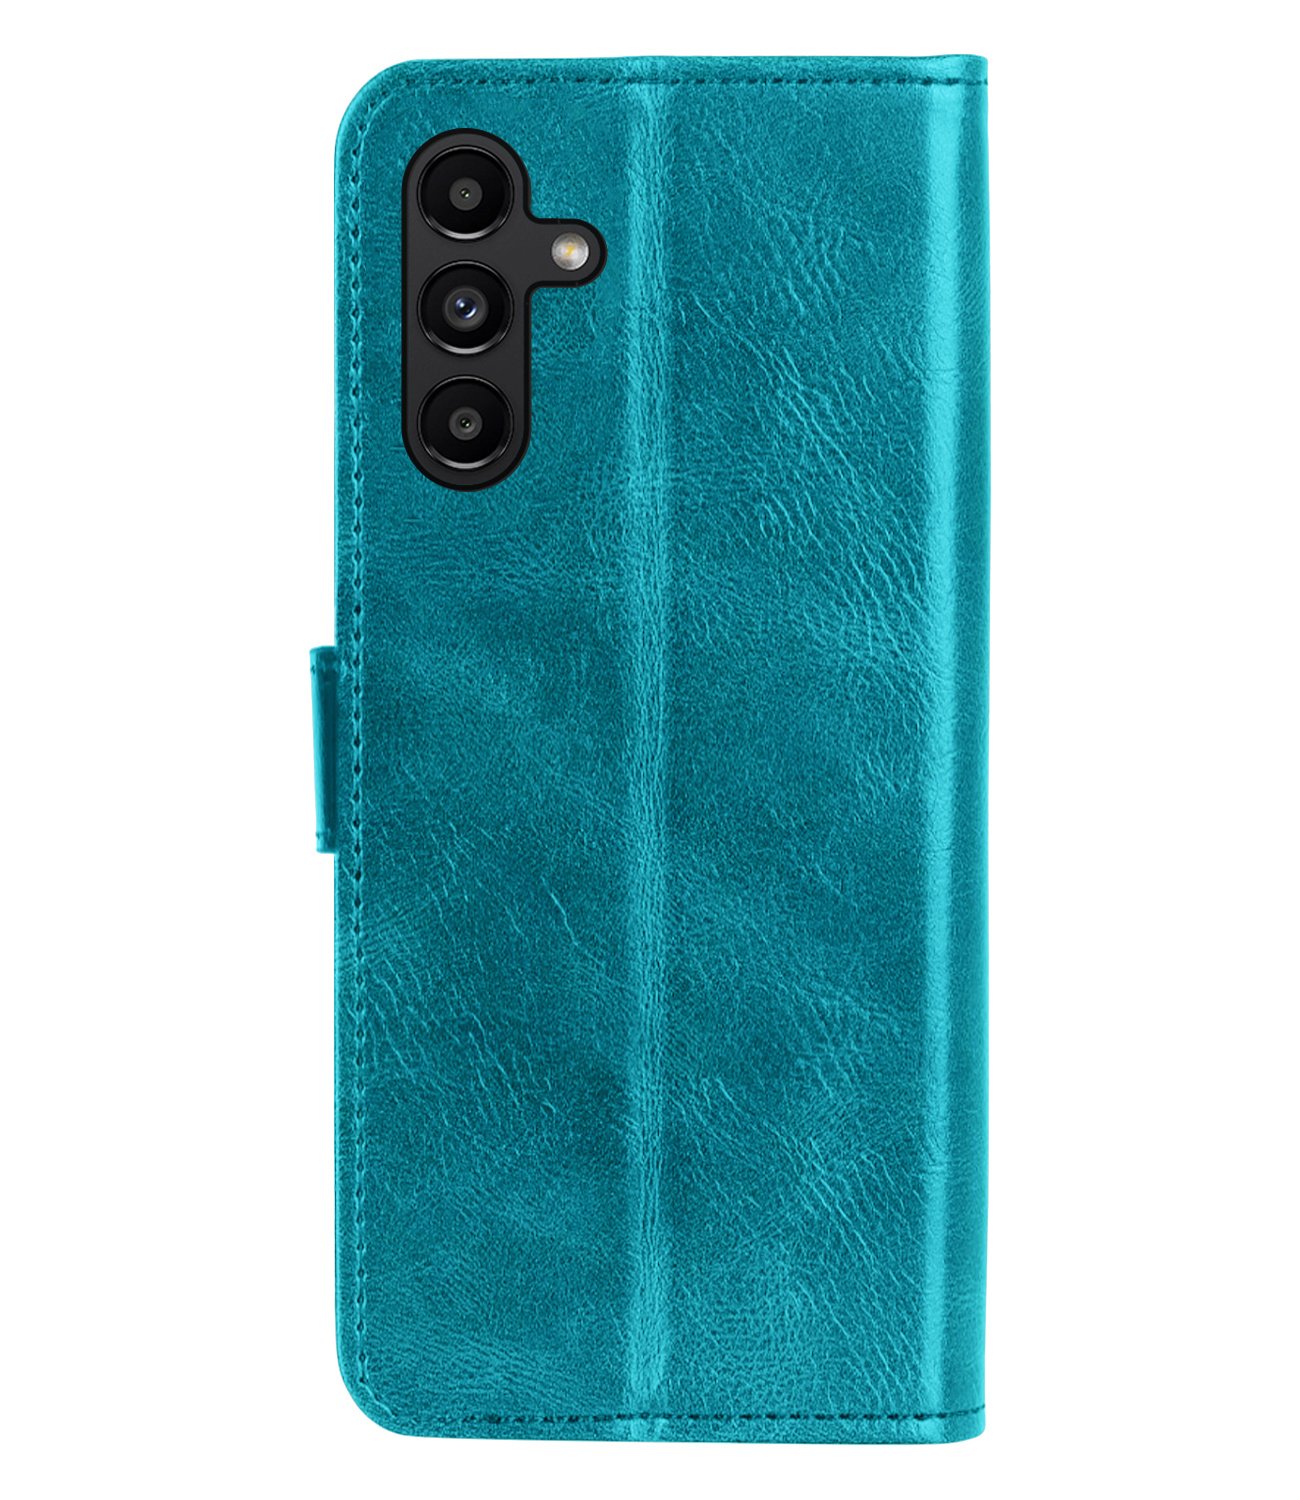 Samsung Galaxy A13 5G Hoes Bookcase Turquoise - Flipcase Turquoise - Samsung Galaxy A13 5G Book Cover - Samsung Galaxy A13 5G Hoesje Turquoise